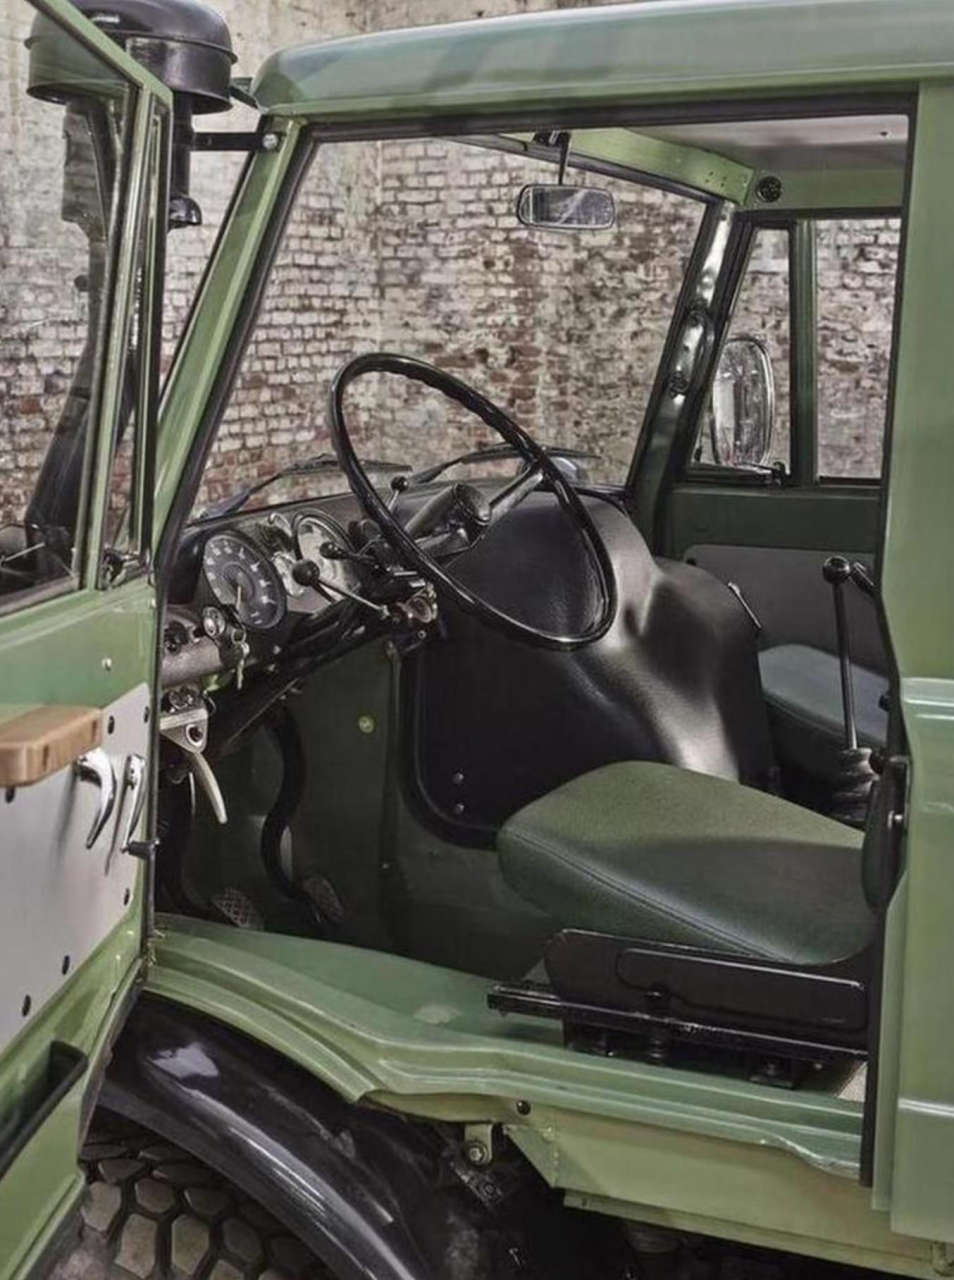 Discover the Mercedes-Benz Unimog 406 Doppelkabine Ute 1976: The Legend of an Age fb - DX